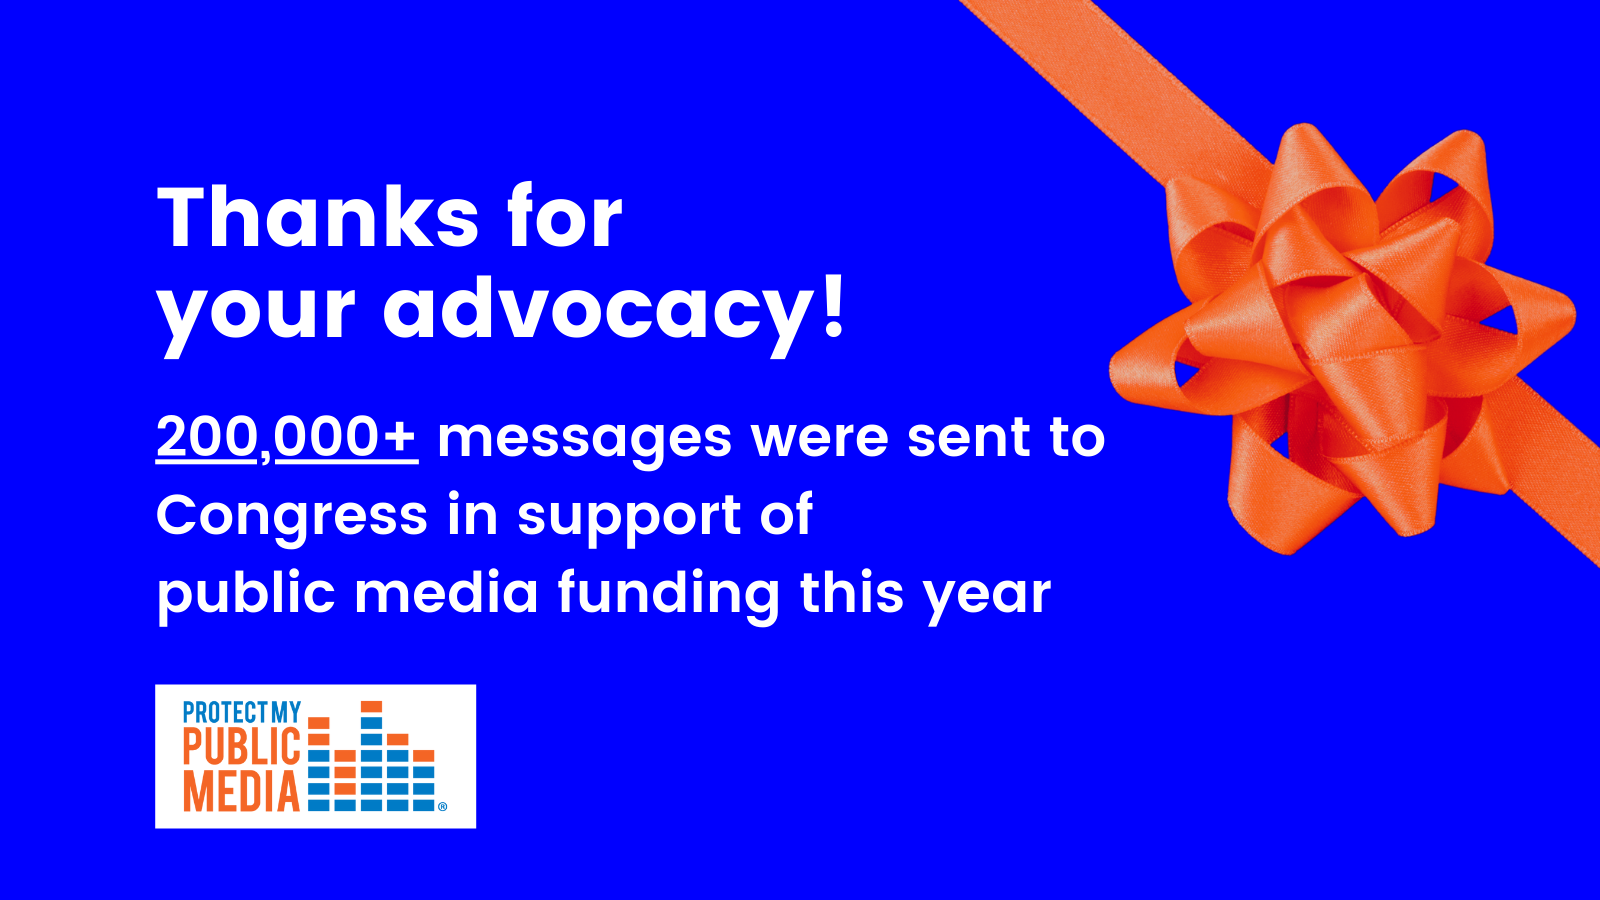 Thanks for your advocacy! 200,000+ messages were sent to Congress in support of public media funding this year